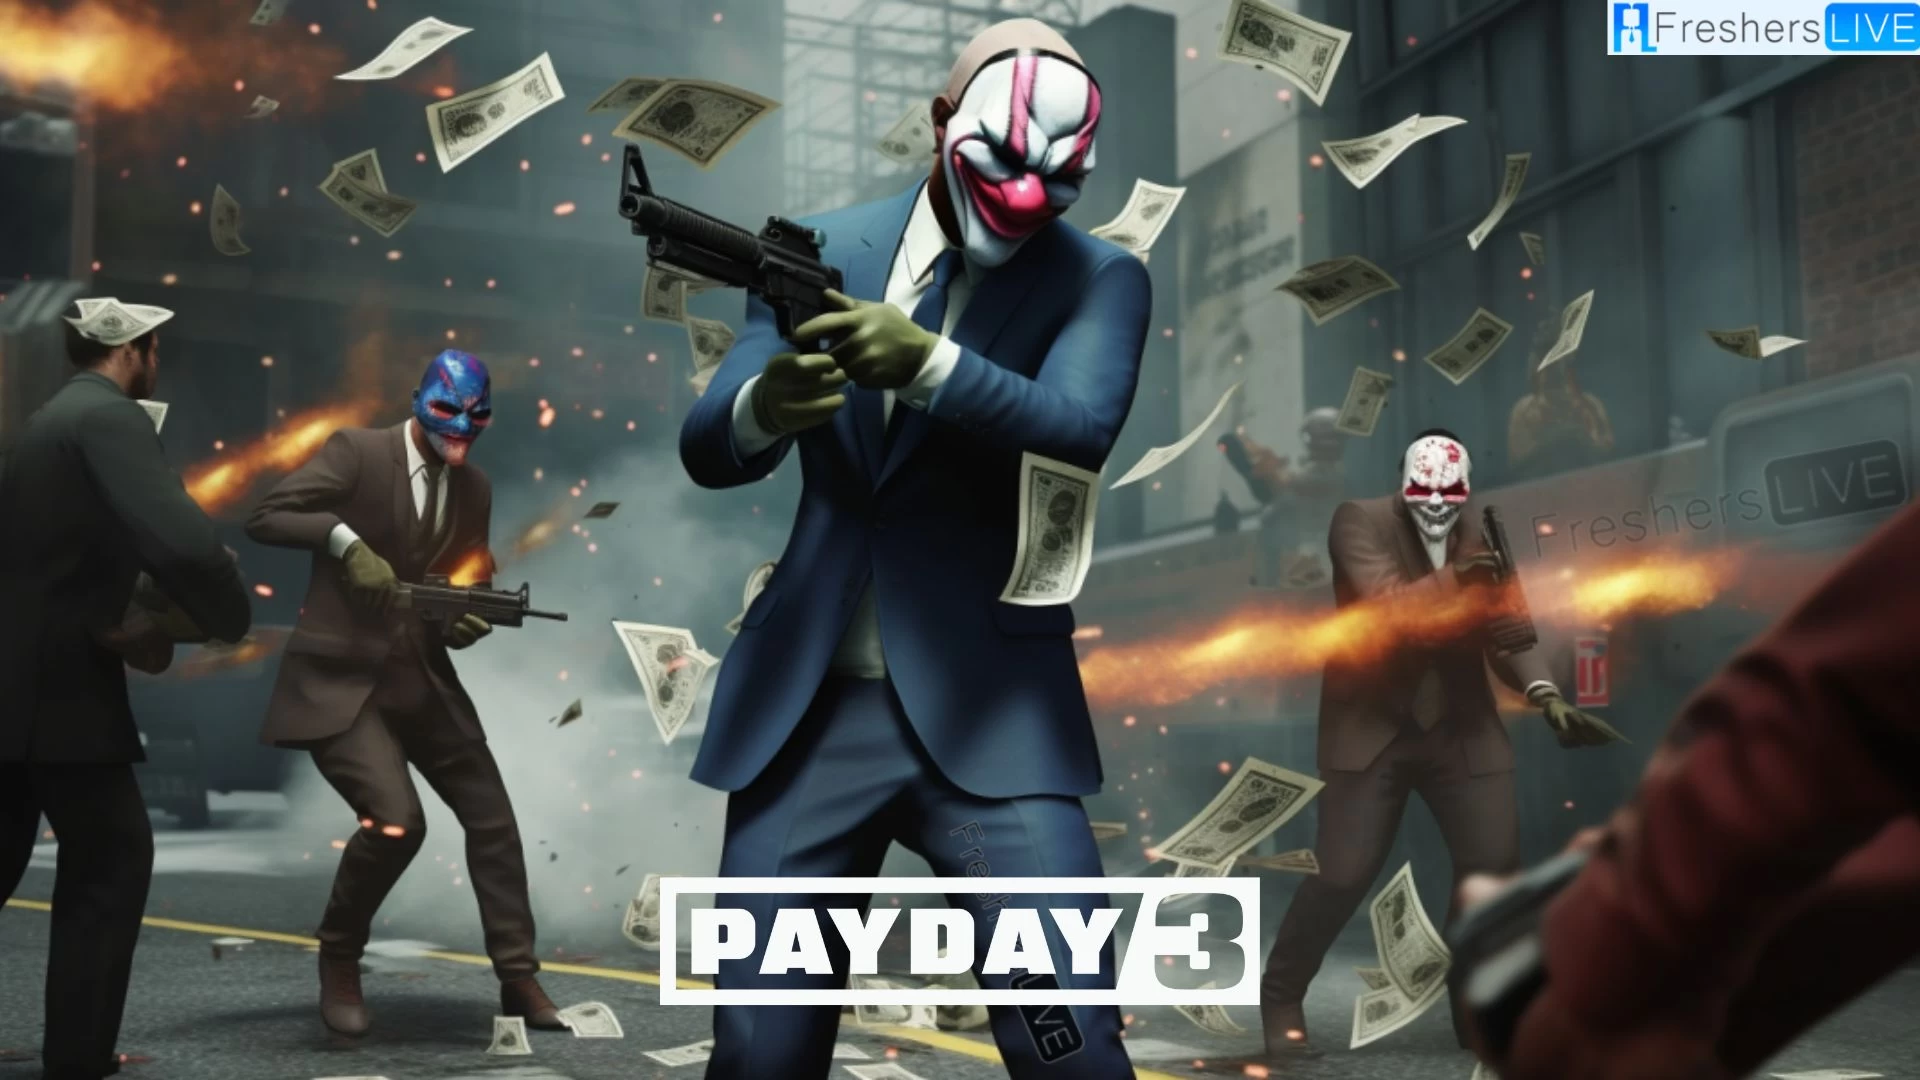 Payday 3 Not Working on Xbox, How to Fix Payday 3 Not Working on Xbox Error?